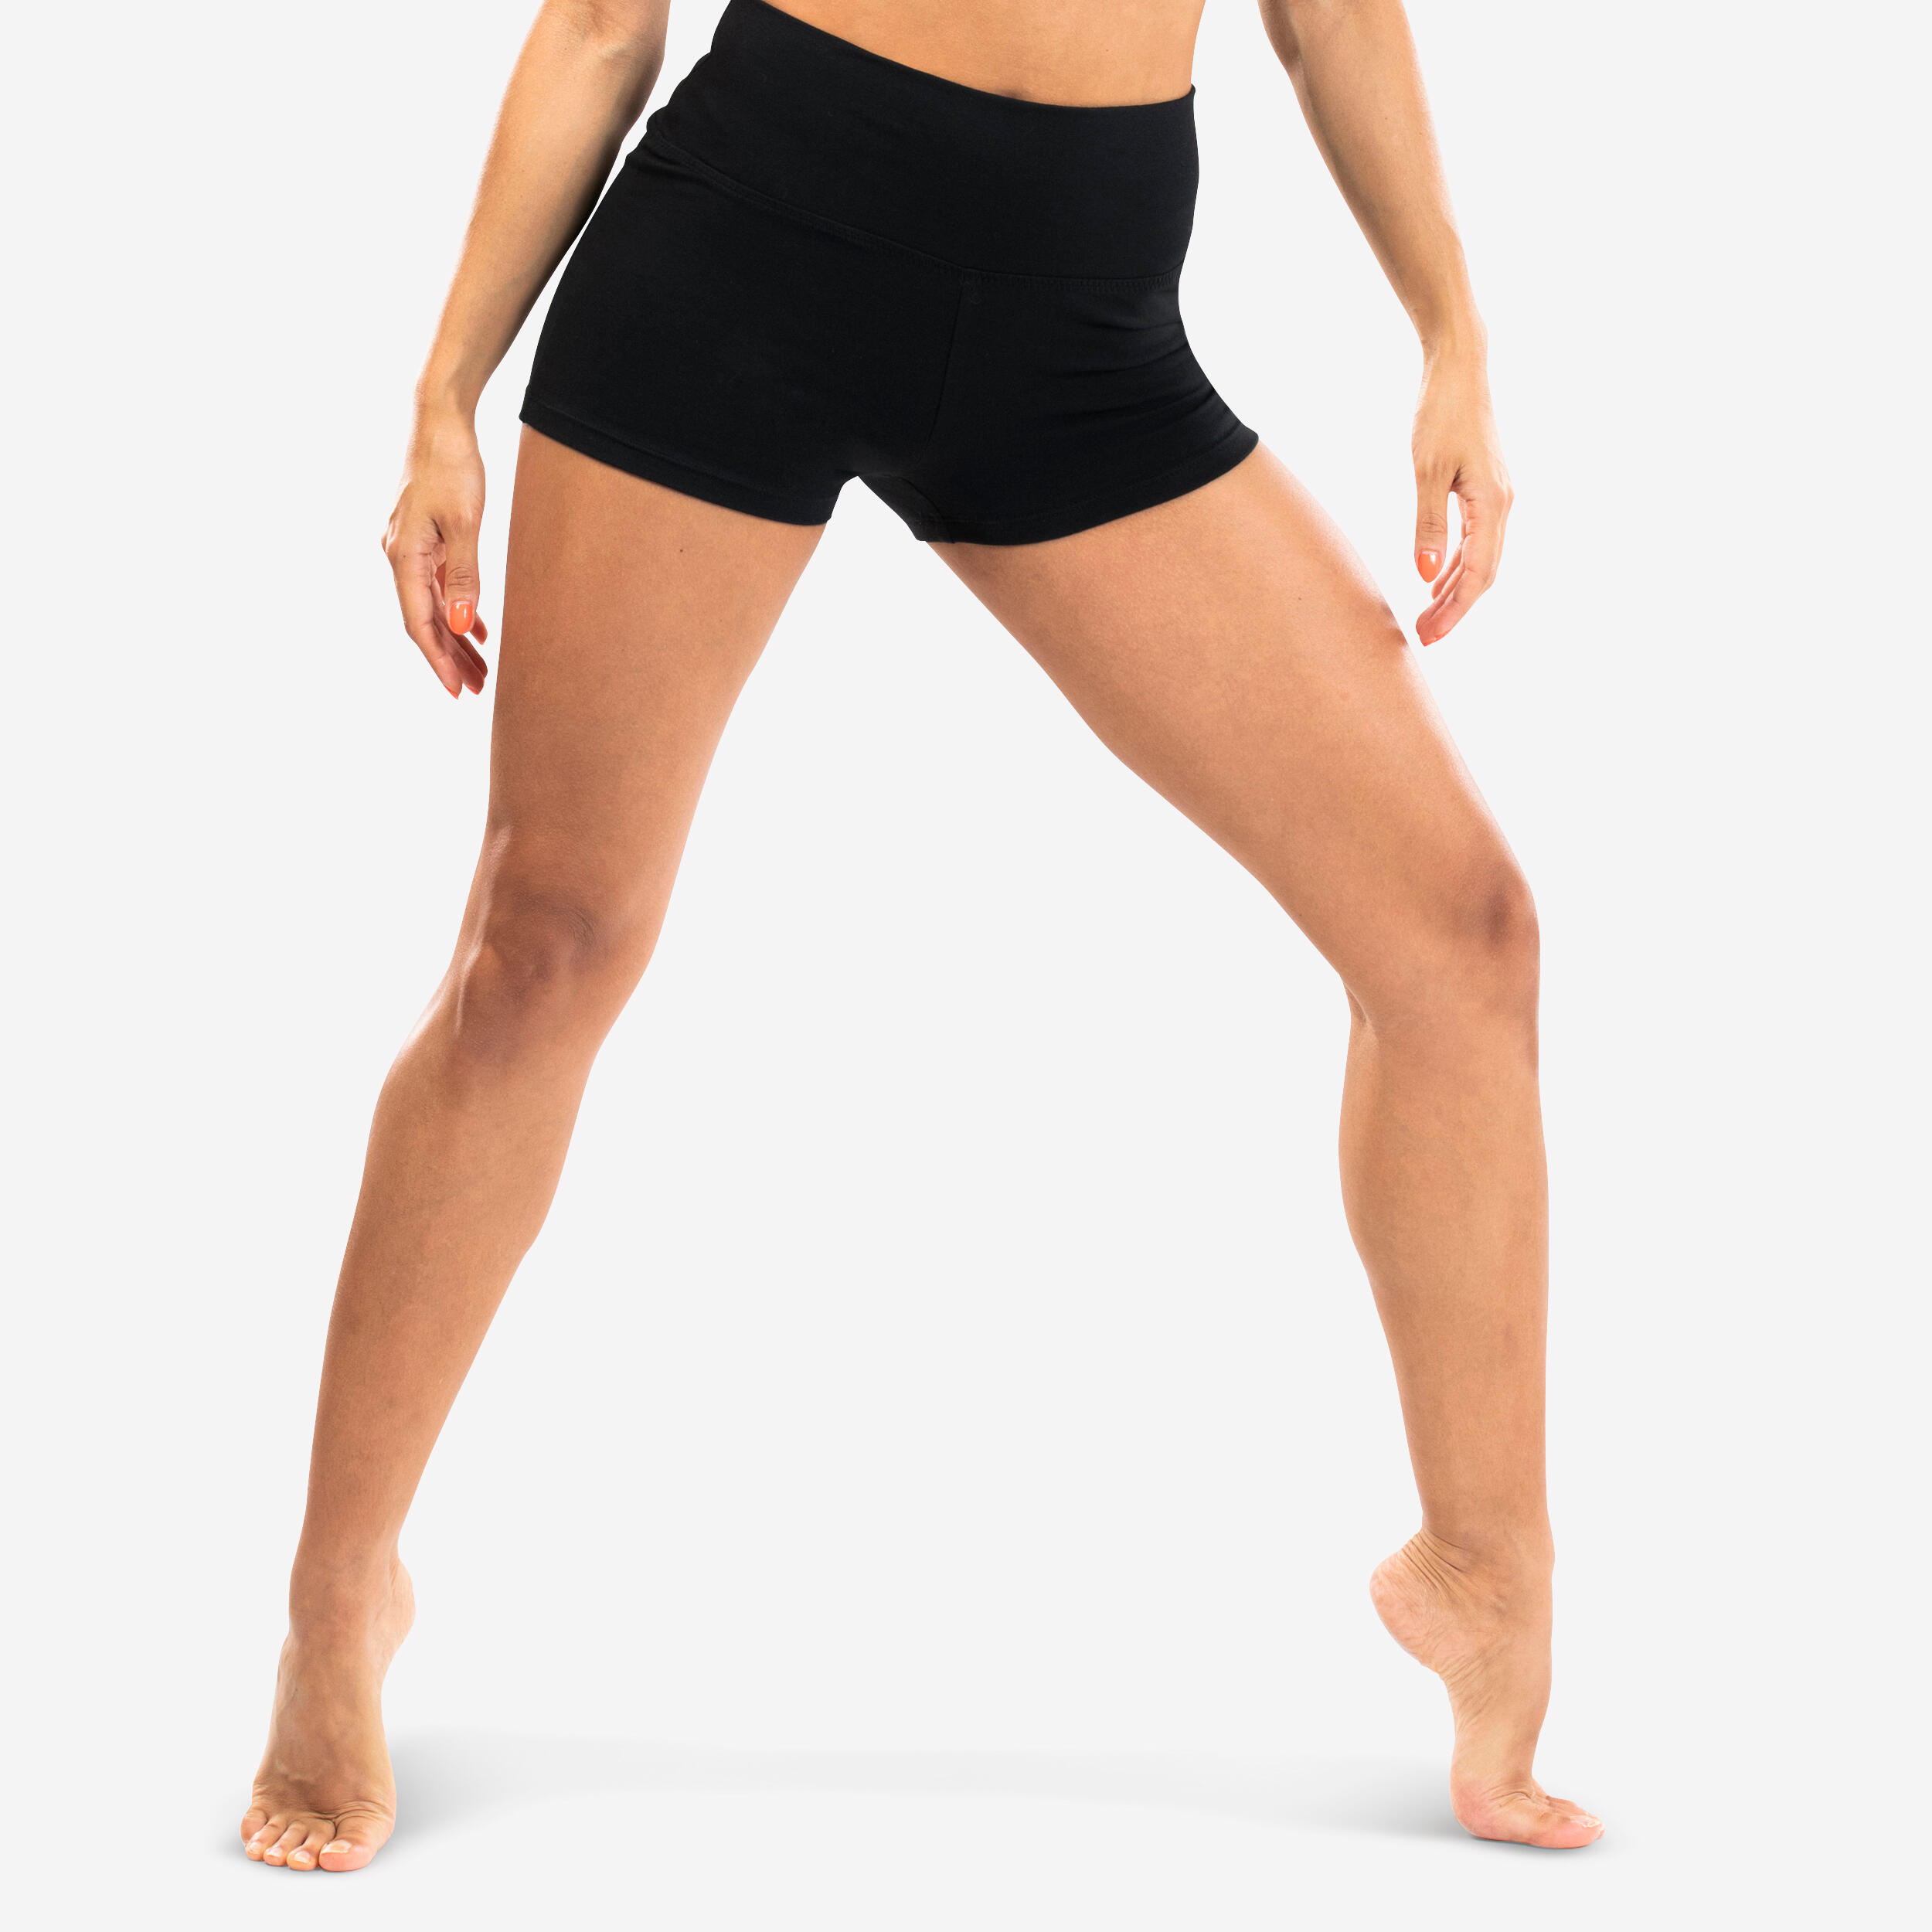 Fitted dance shorts – Women